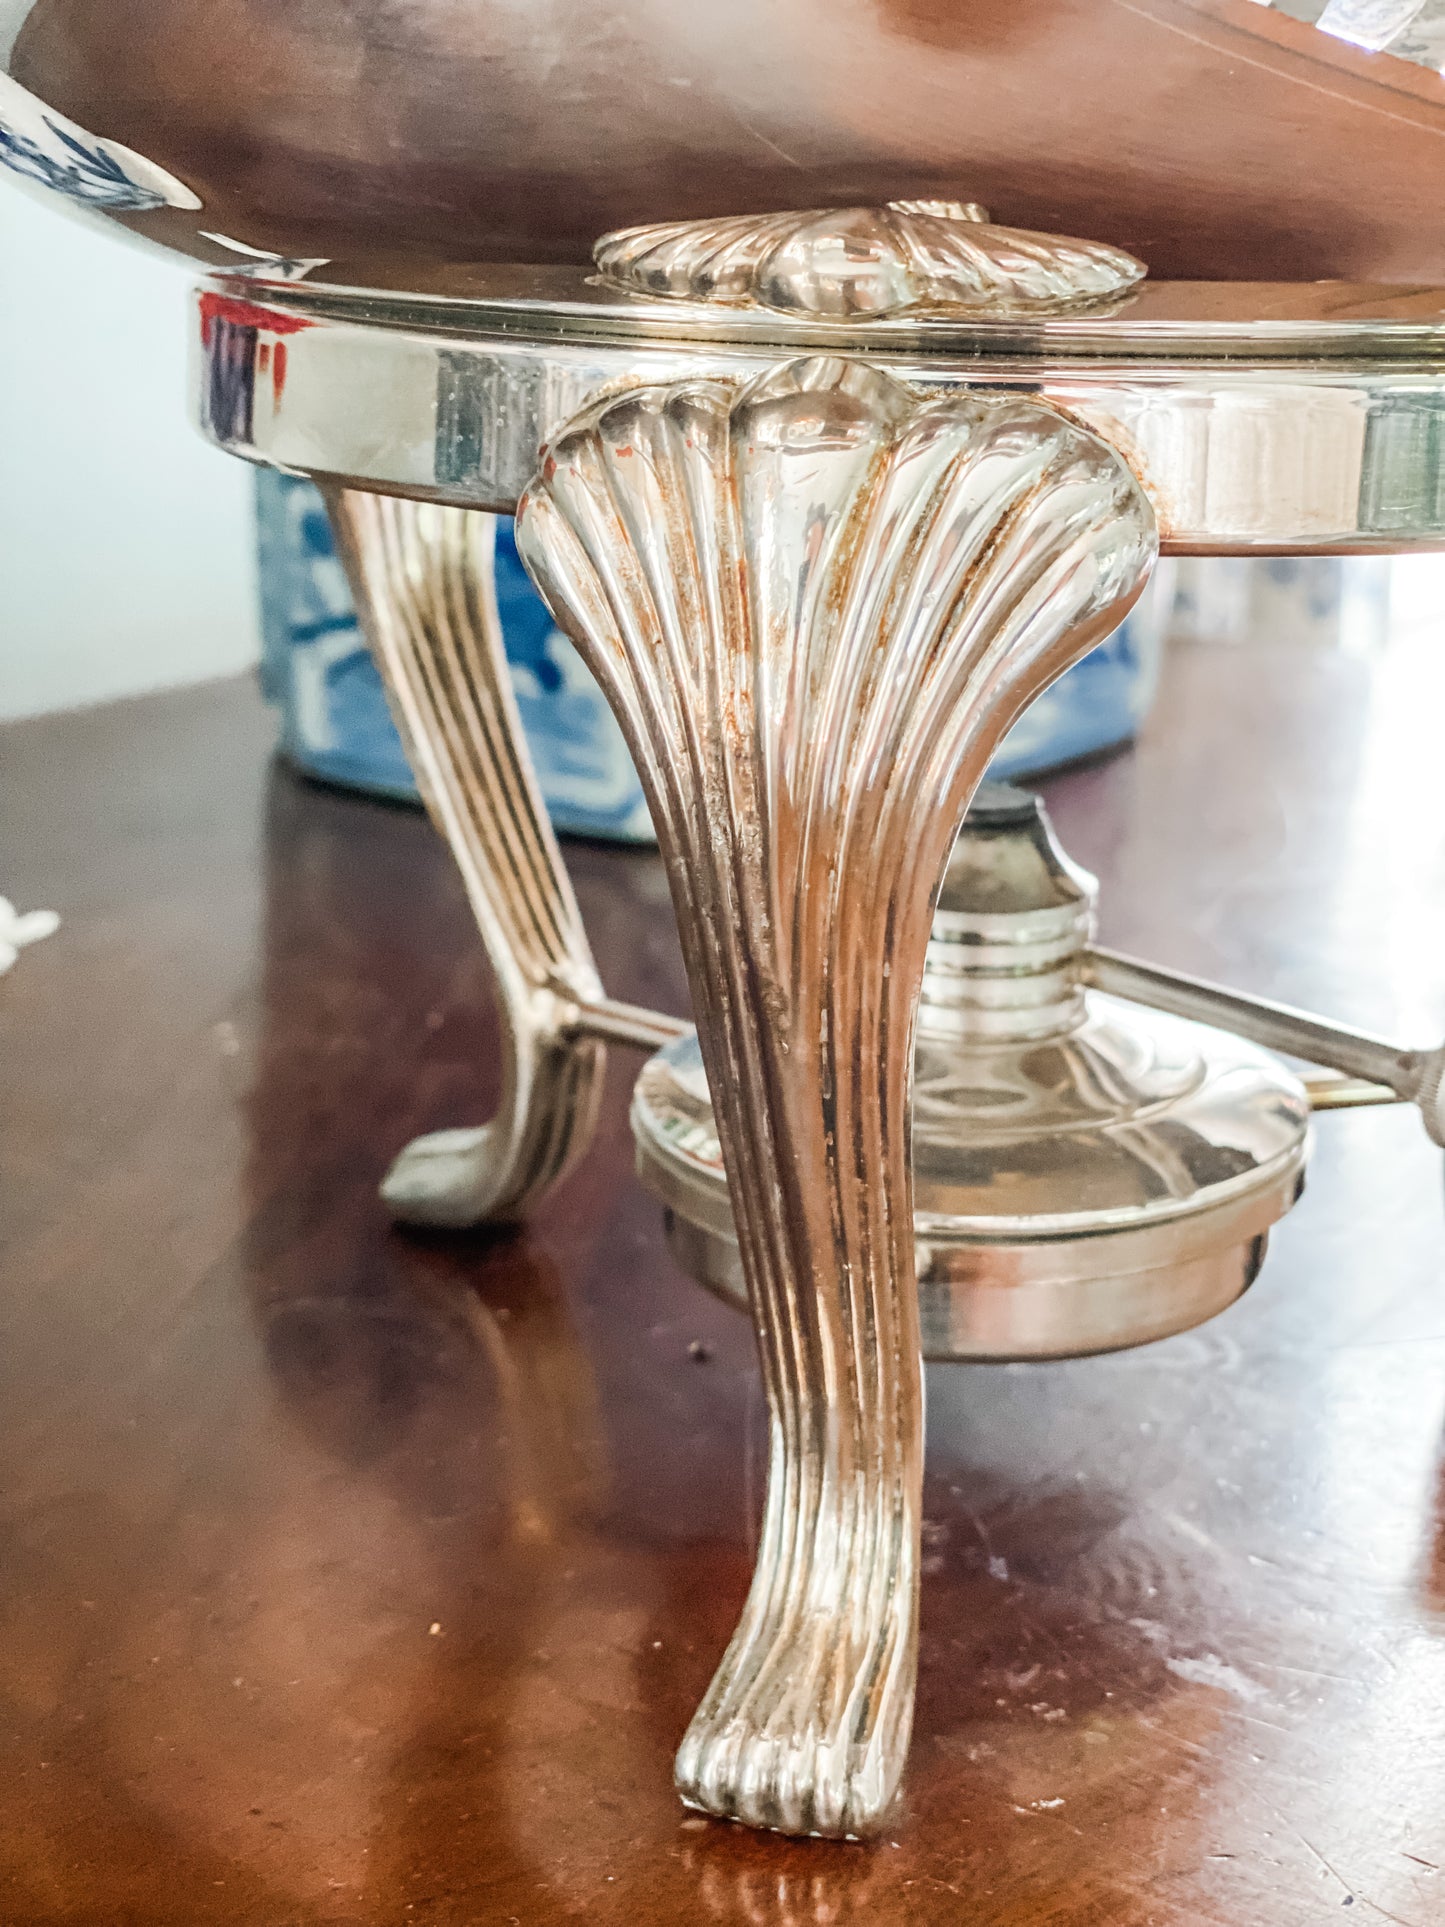 Vintage Silver Chafing Dish on Elevated Stand